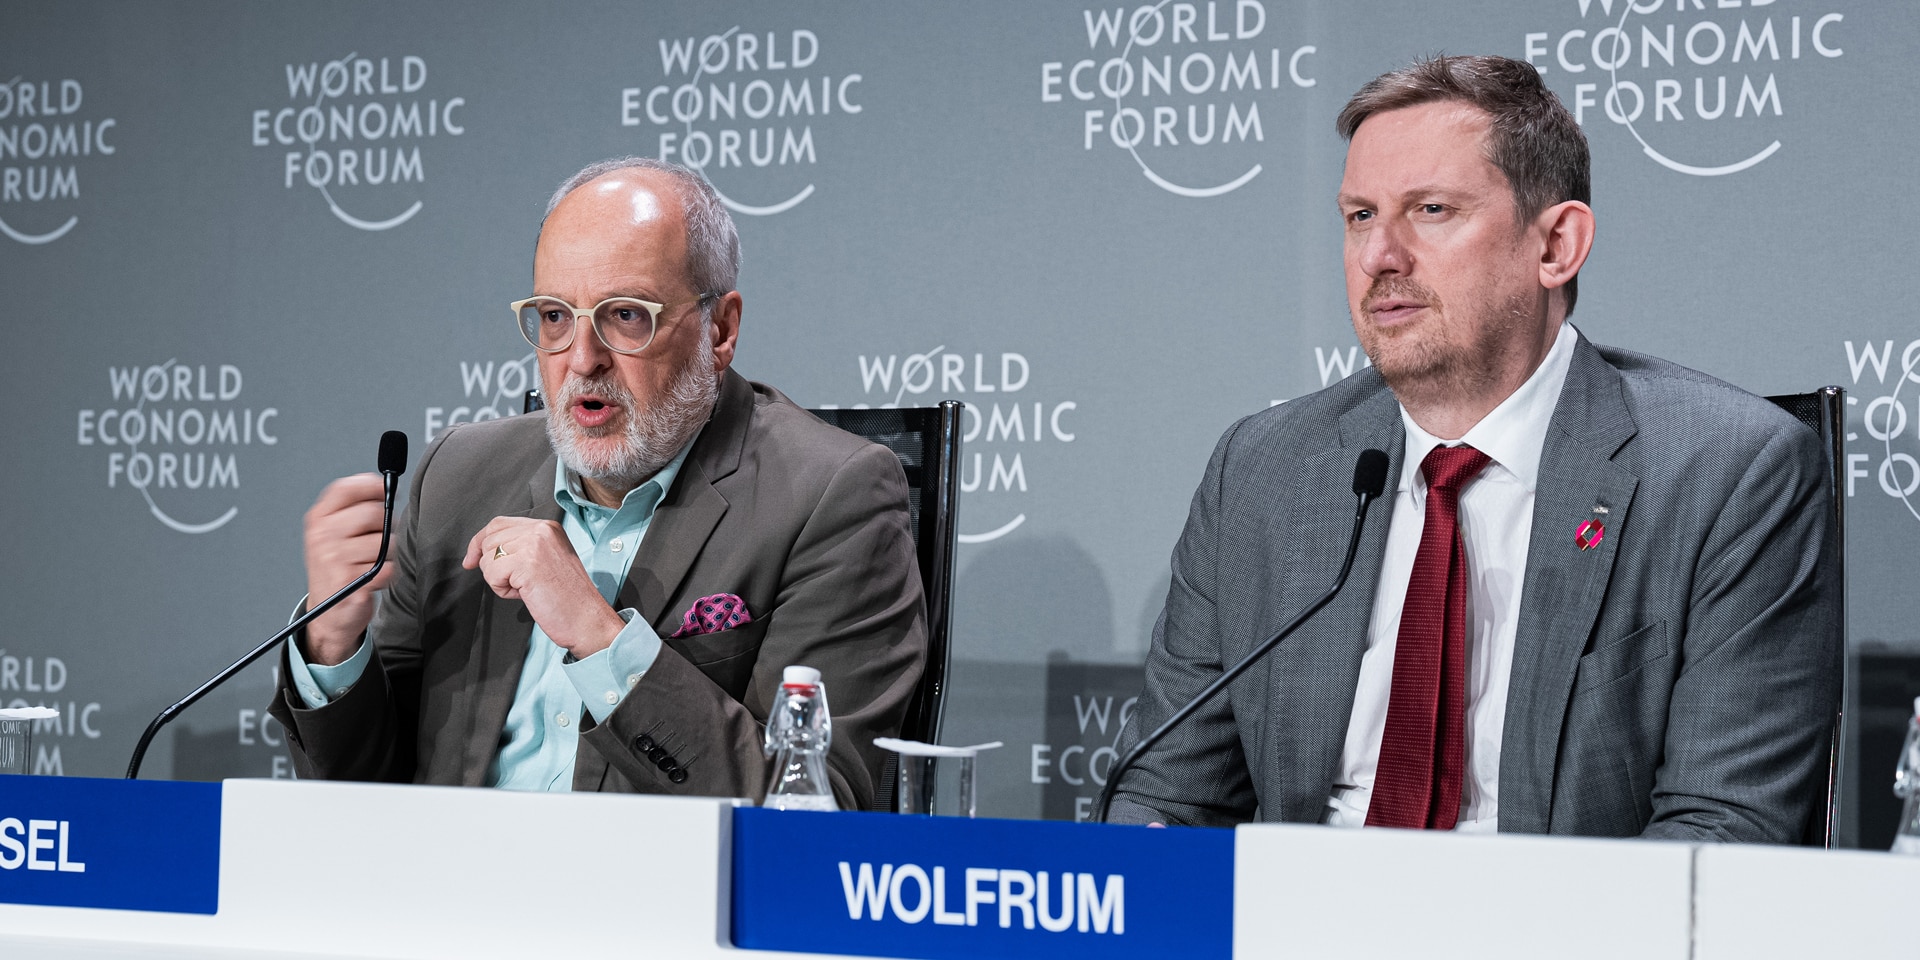 FDFA State Secretary Alexandre Fasel and Christian Wolfrum, Vice-President of ETH Zurich, at the press conference to launch the ICAIN initiative at the WEF in Davos.